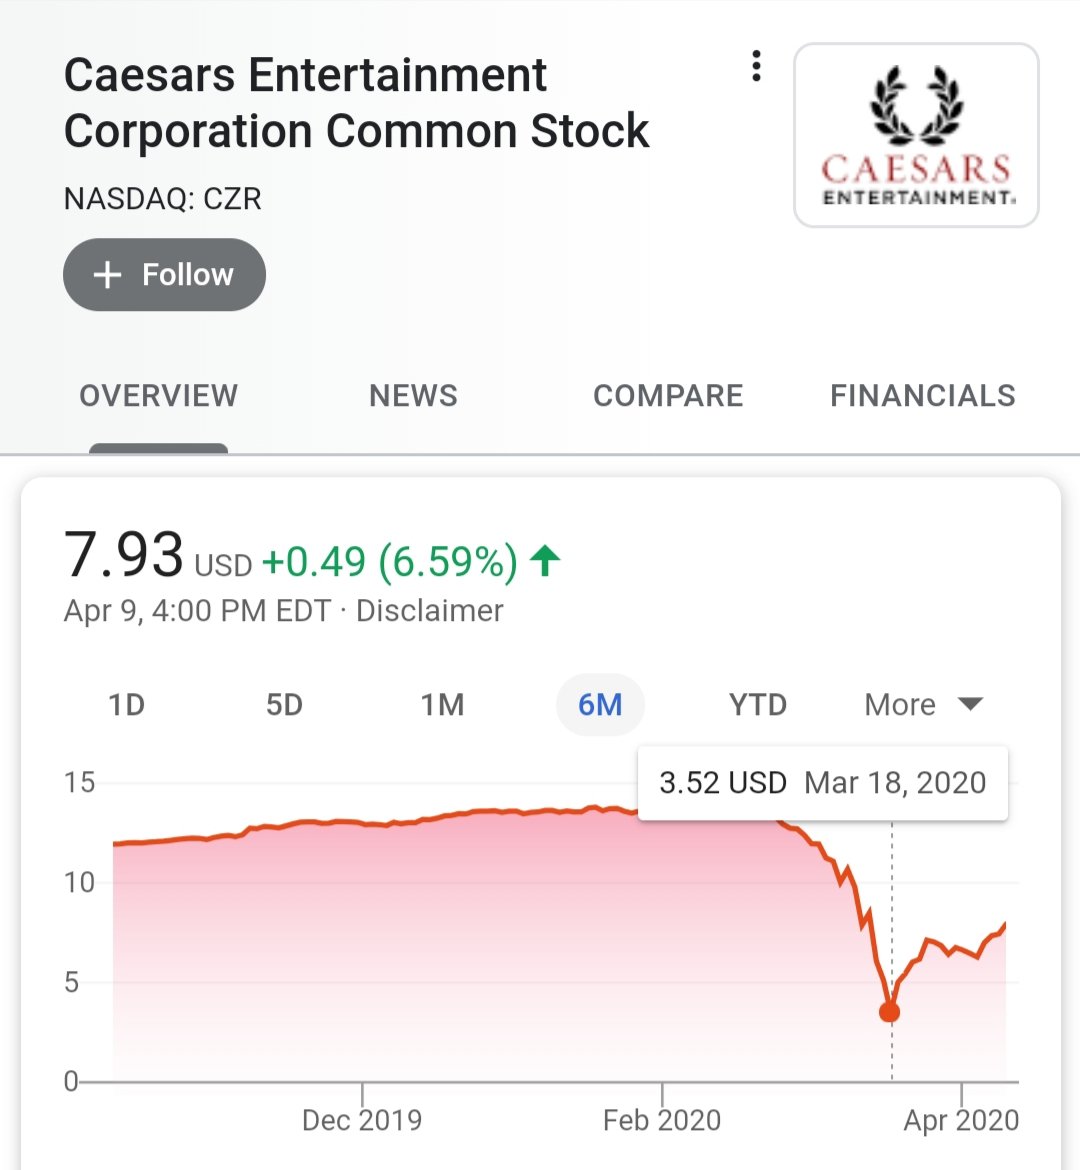 One transaction that the Khanna family definitely benefited from was the numerous sales totaling $15K—$235K) in Caesar's Entertainment/Casinos.Within a month, Caesars stock would drop %75 to their 6 mo. low—saving them $11K to $176K from the sale.